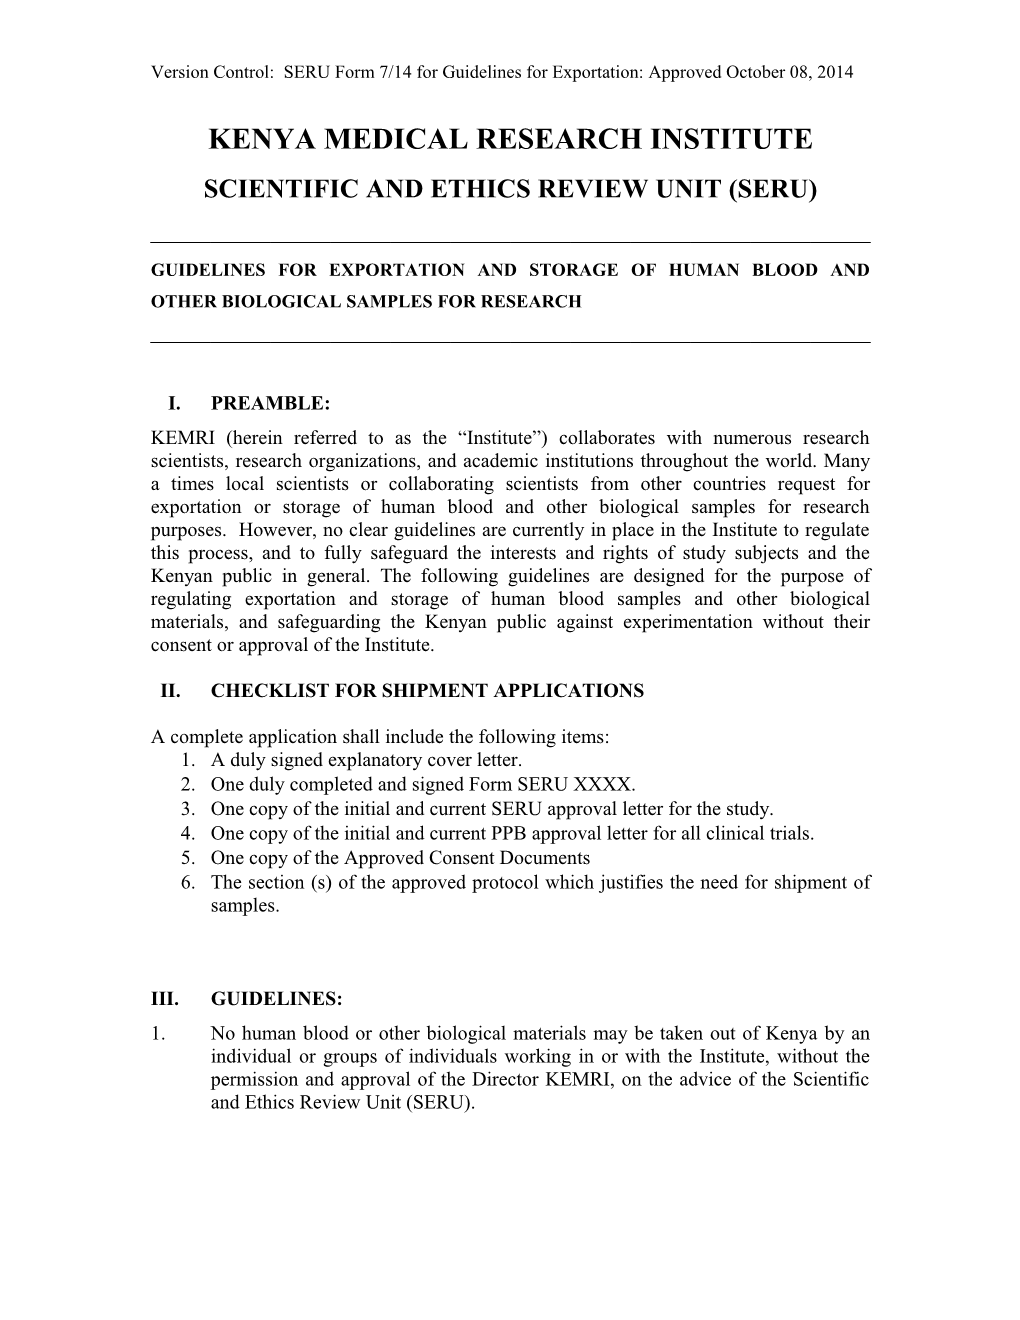 Kemri Ssc Guidelines for the Exportation of Human Blood and Other Biological Samples Out